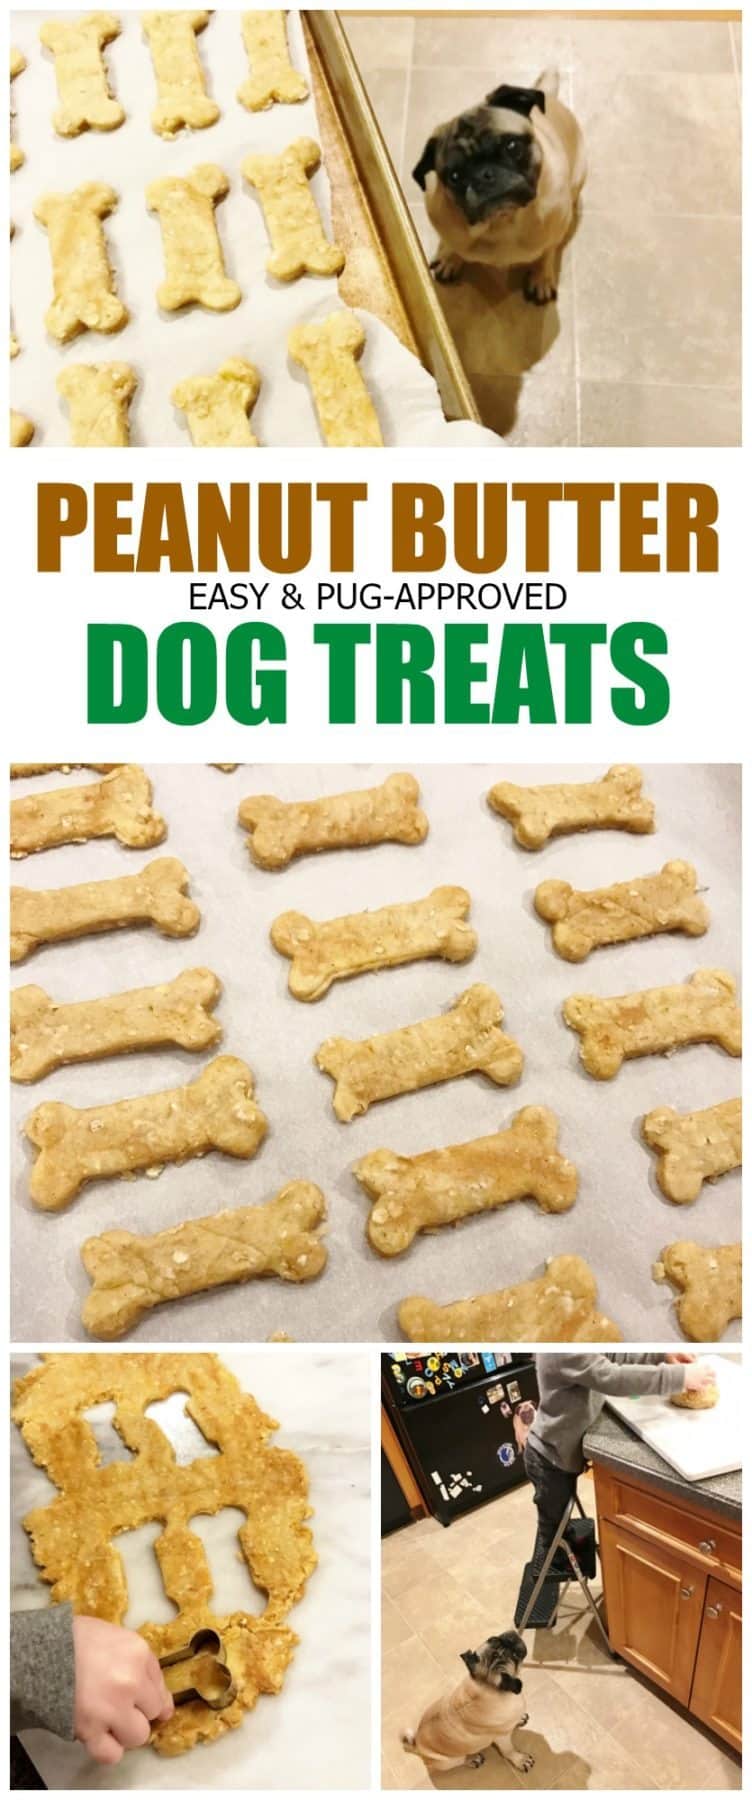 peanut-butter-dog-treats-pug-approved